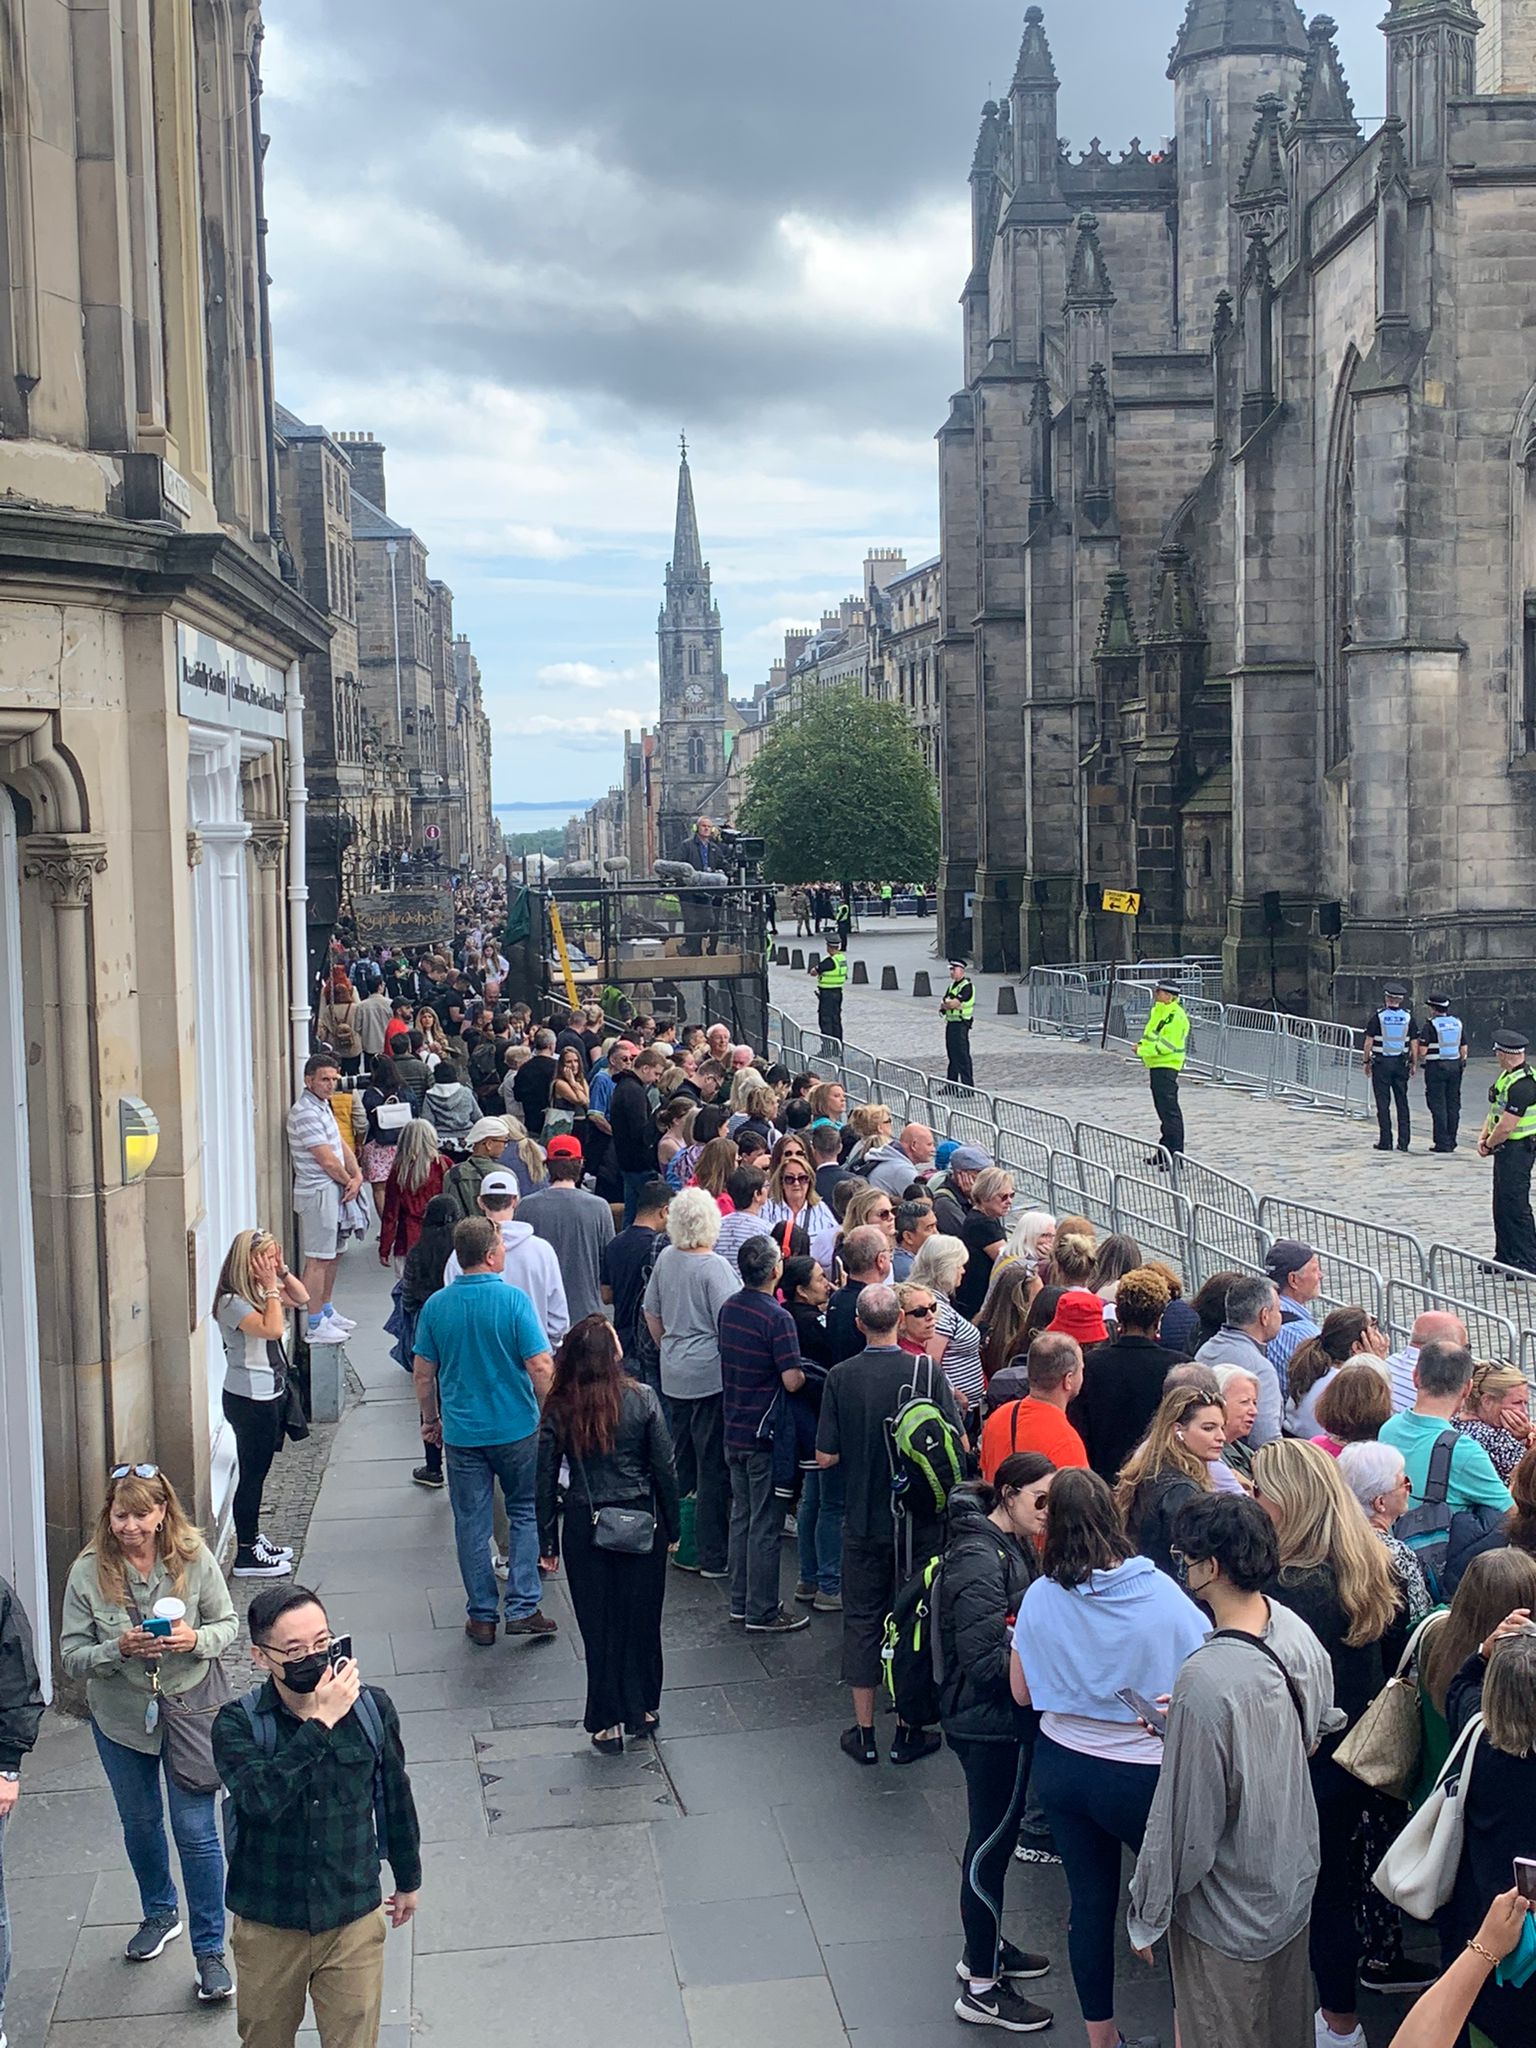 Crowds have already started to gather on Edinburgh's Royal Mile in preparation for the arrival of the cortege.